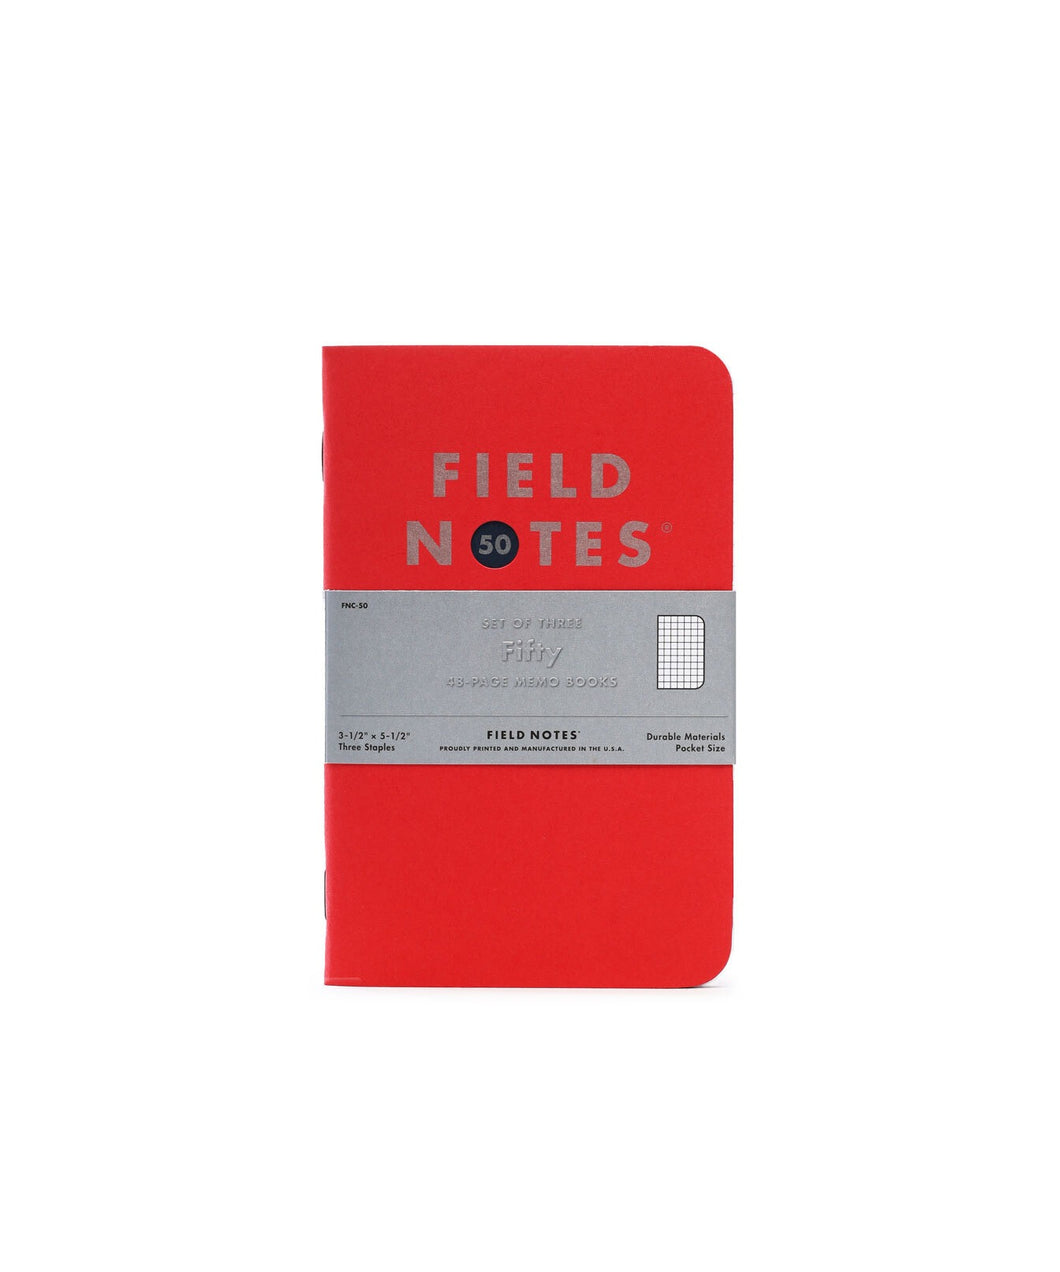 Field Notes - Fifty (3pk)